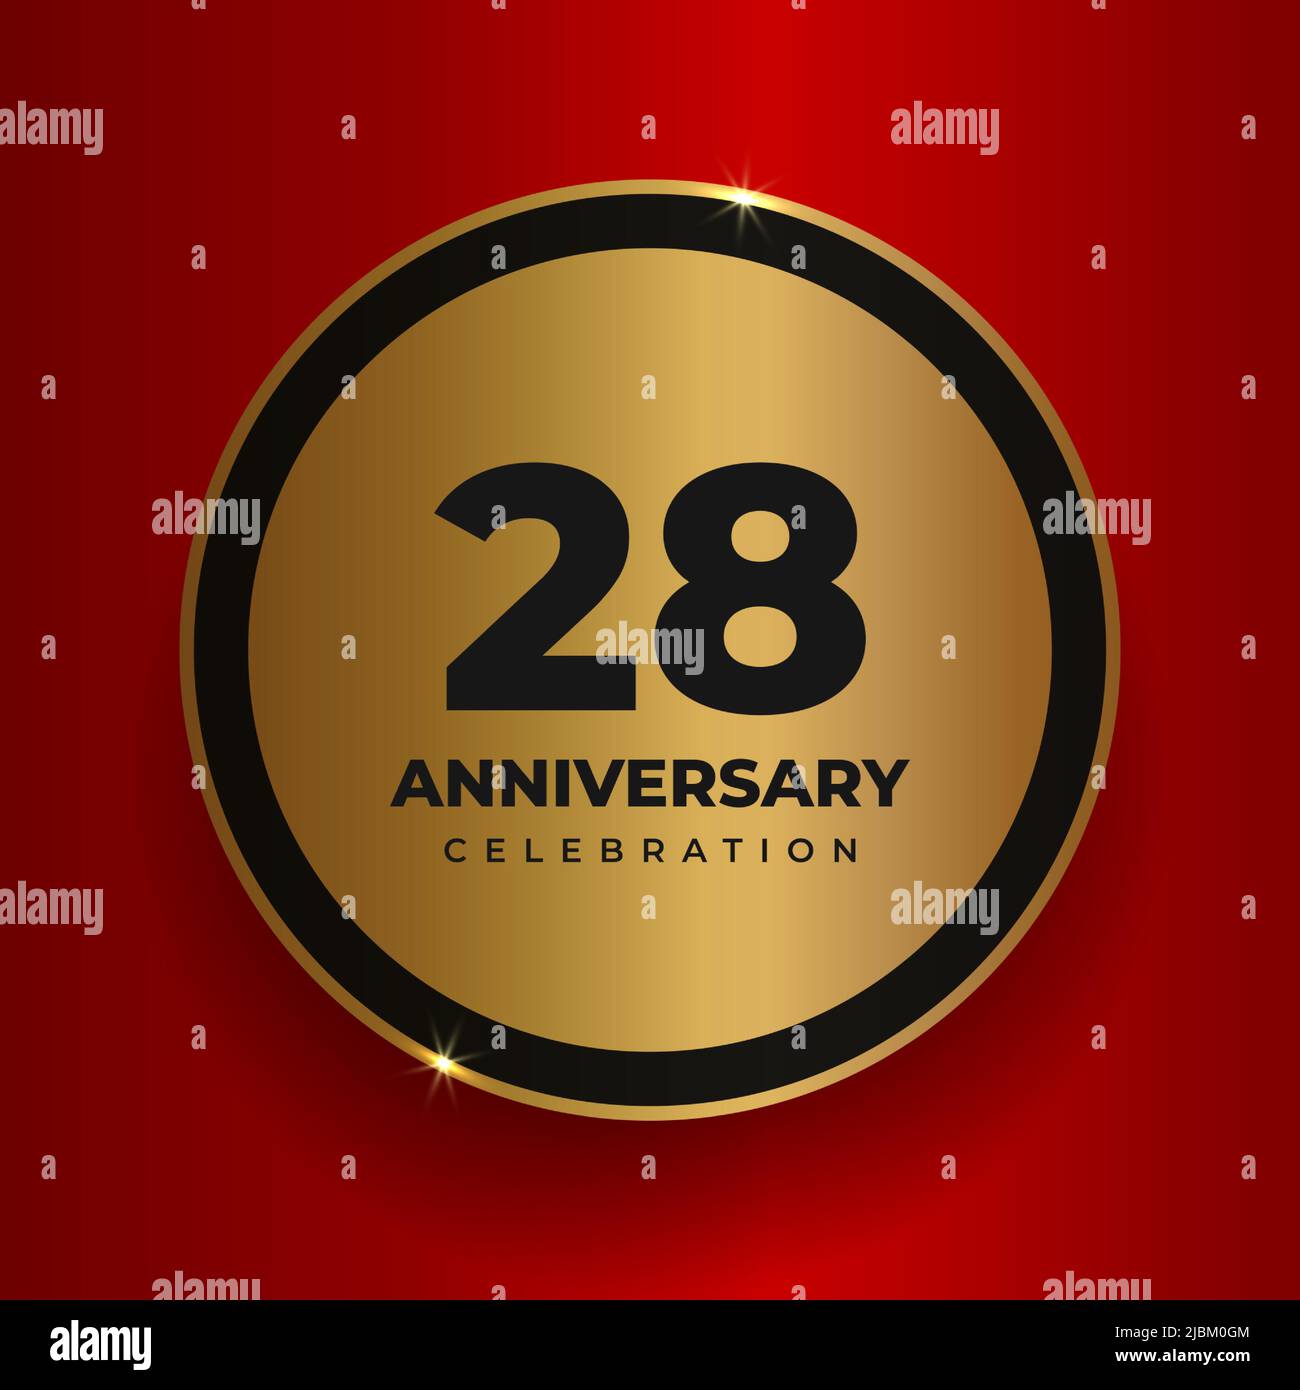 28 years anniversary celebration background. Celebrating 28th anniversary event party poster template. Vector golden circle with numbers and text on Stock Vector